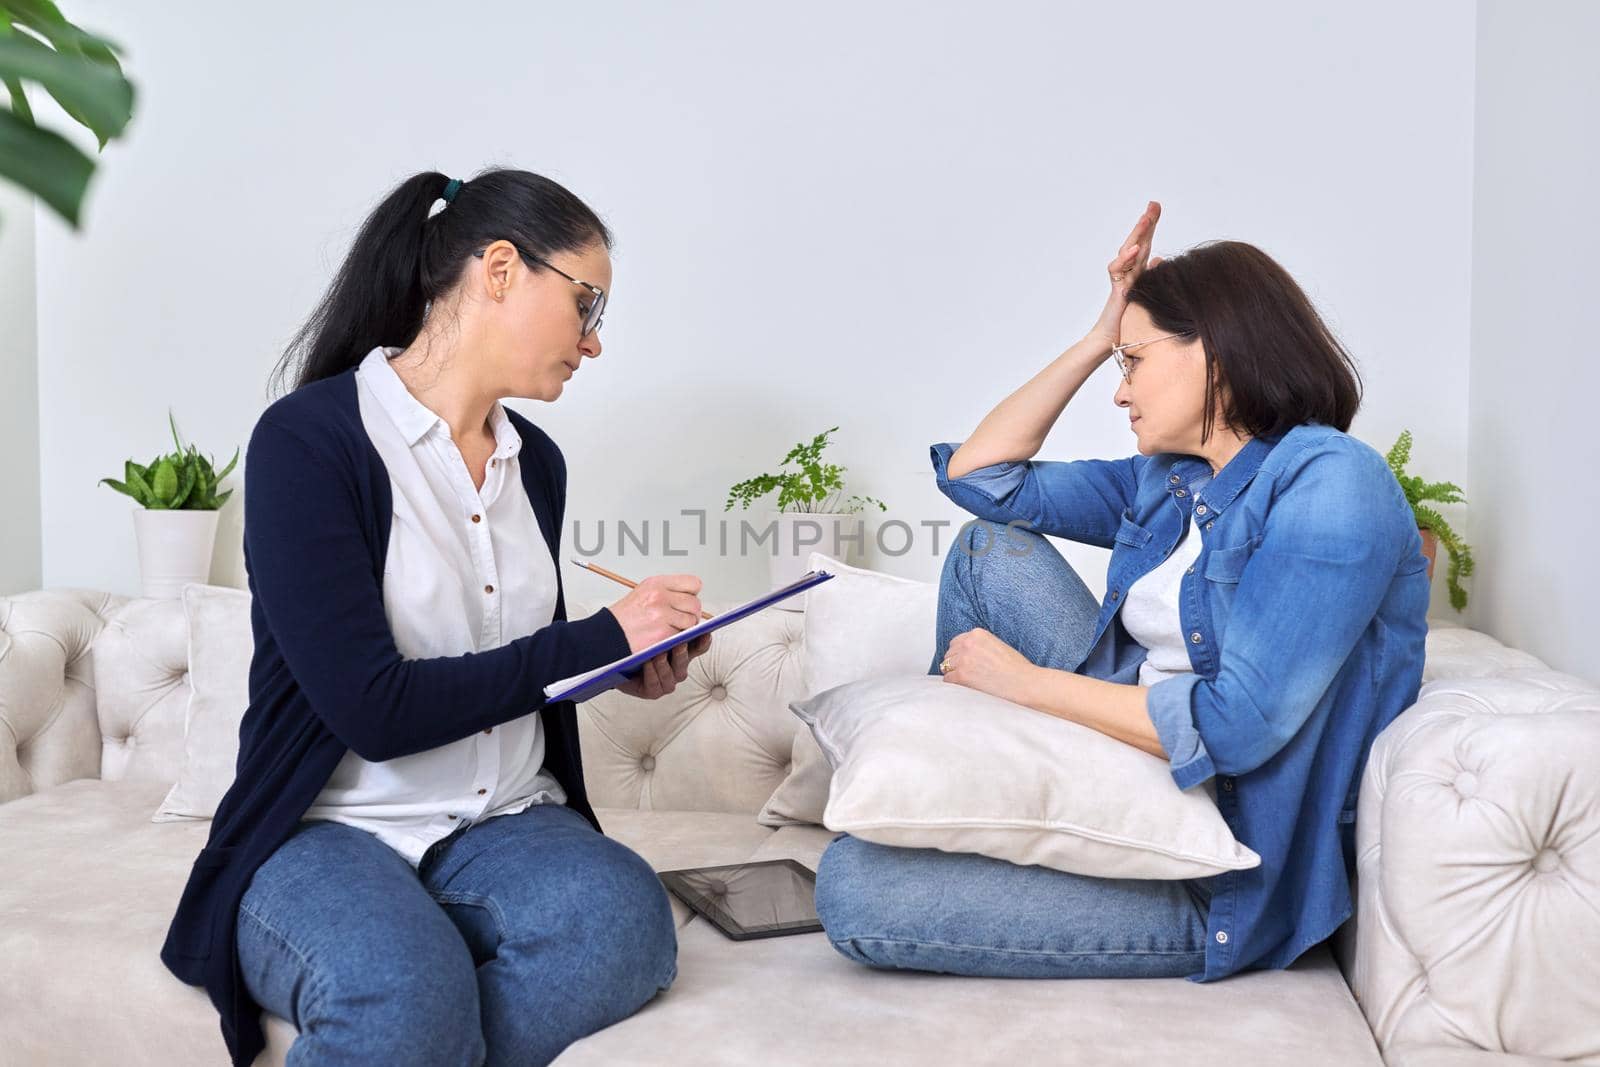 Mature woman at meeting with psychologist, therapist, counselor. Professional help, mental health of middle-aged people, social difficulties